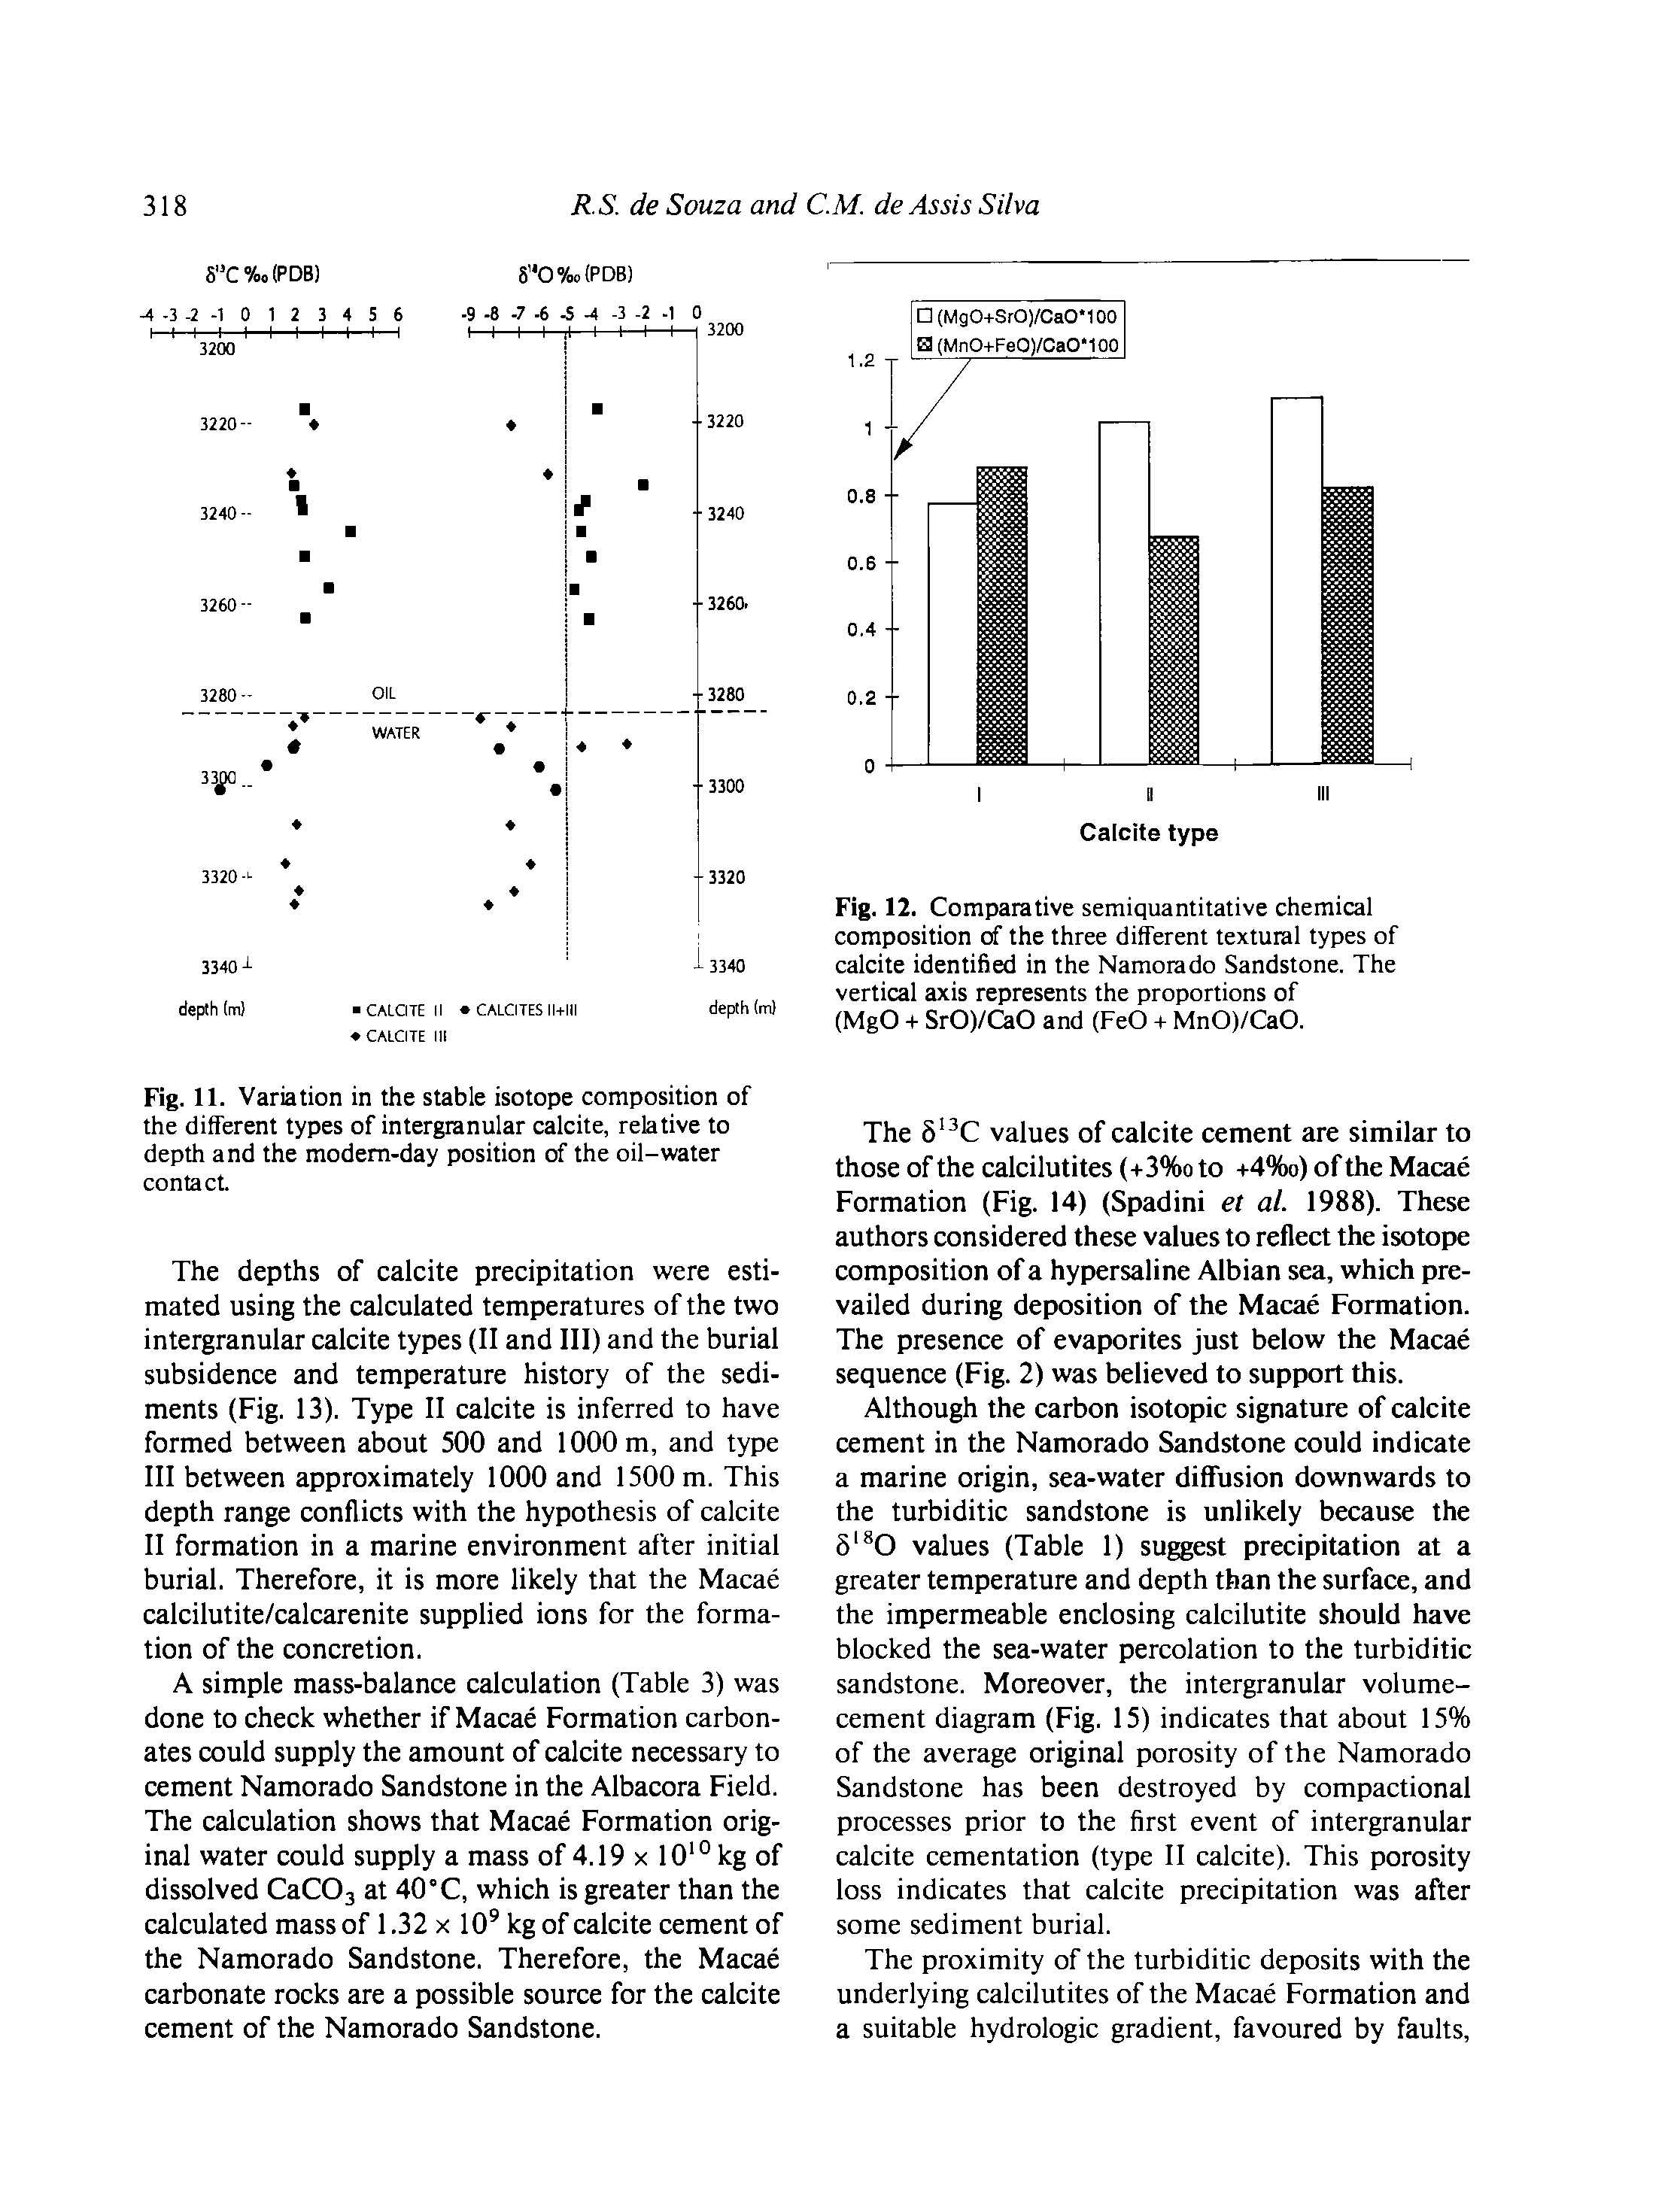 Fig. 11. Variation in the stable isotope composition of the different types of intergranular calcite, relative to depth and the modern-day position of the oil-water contact.